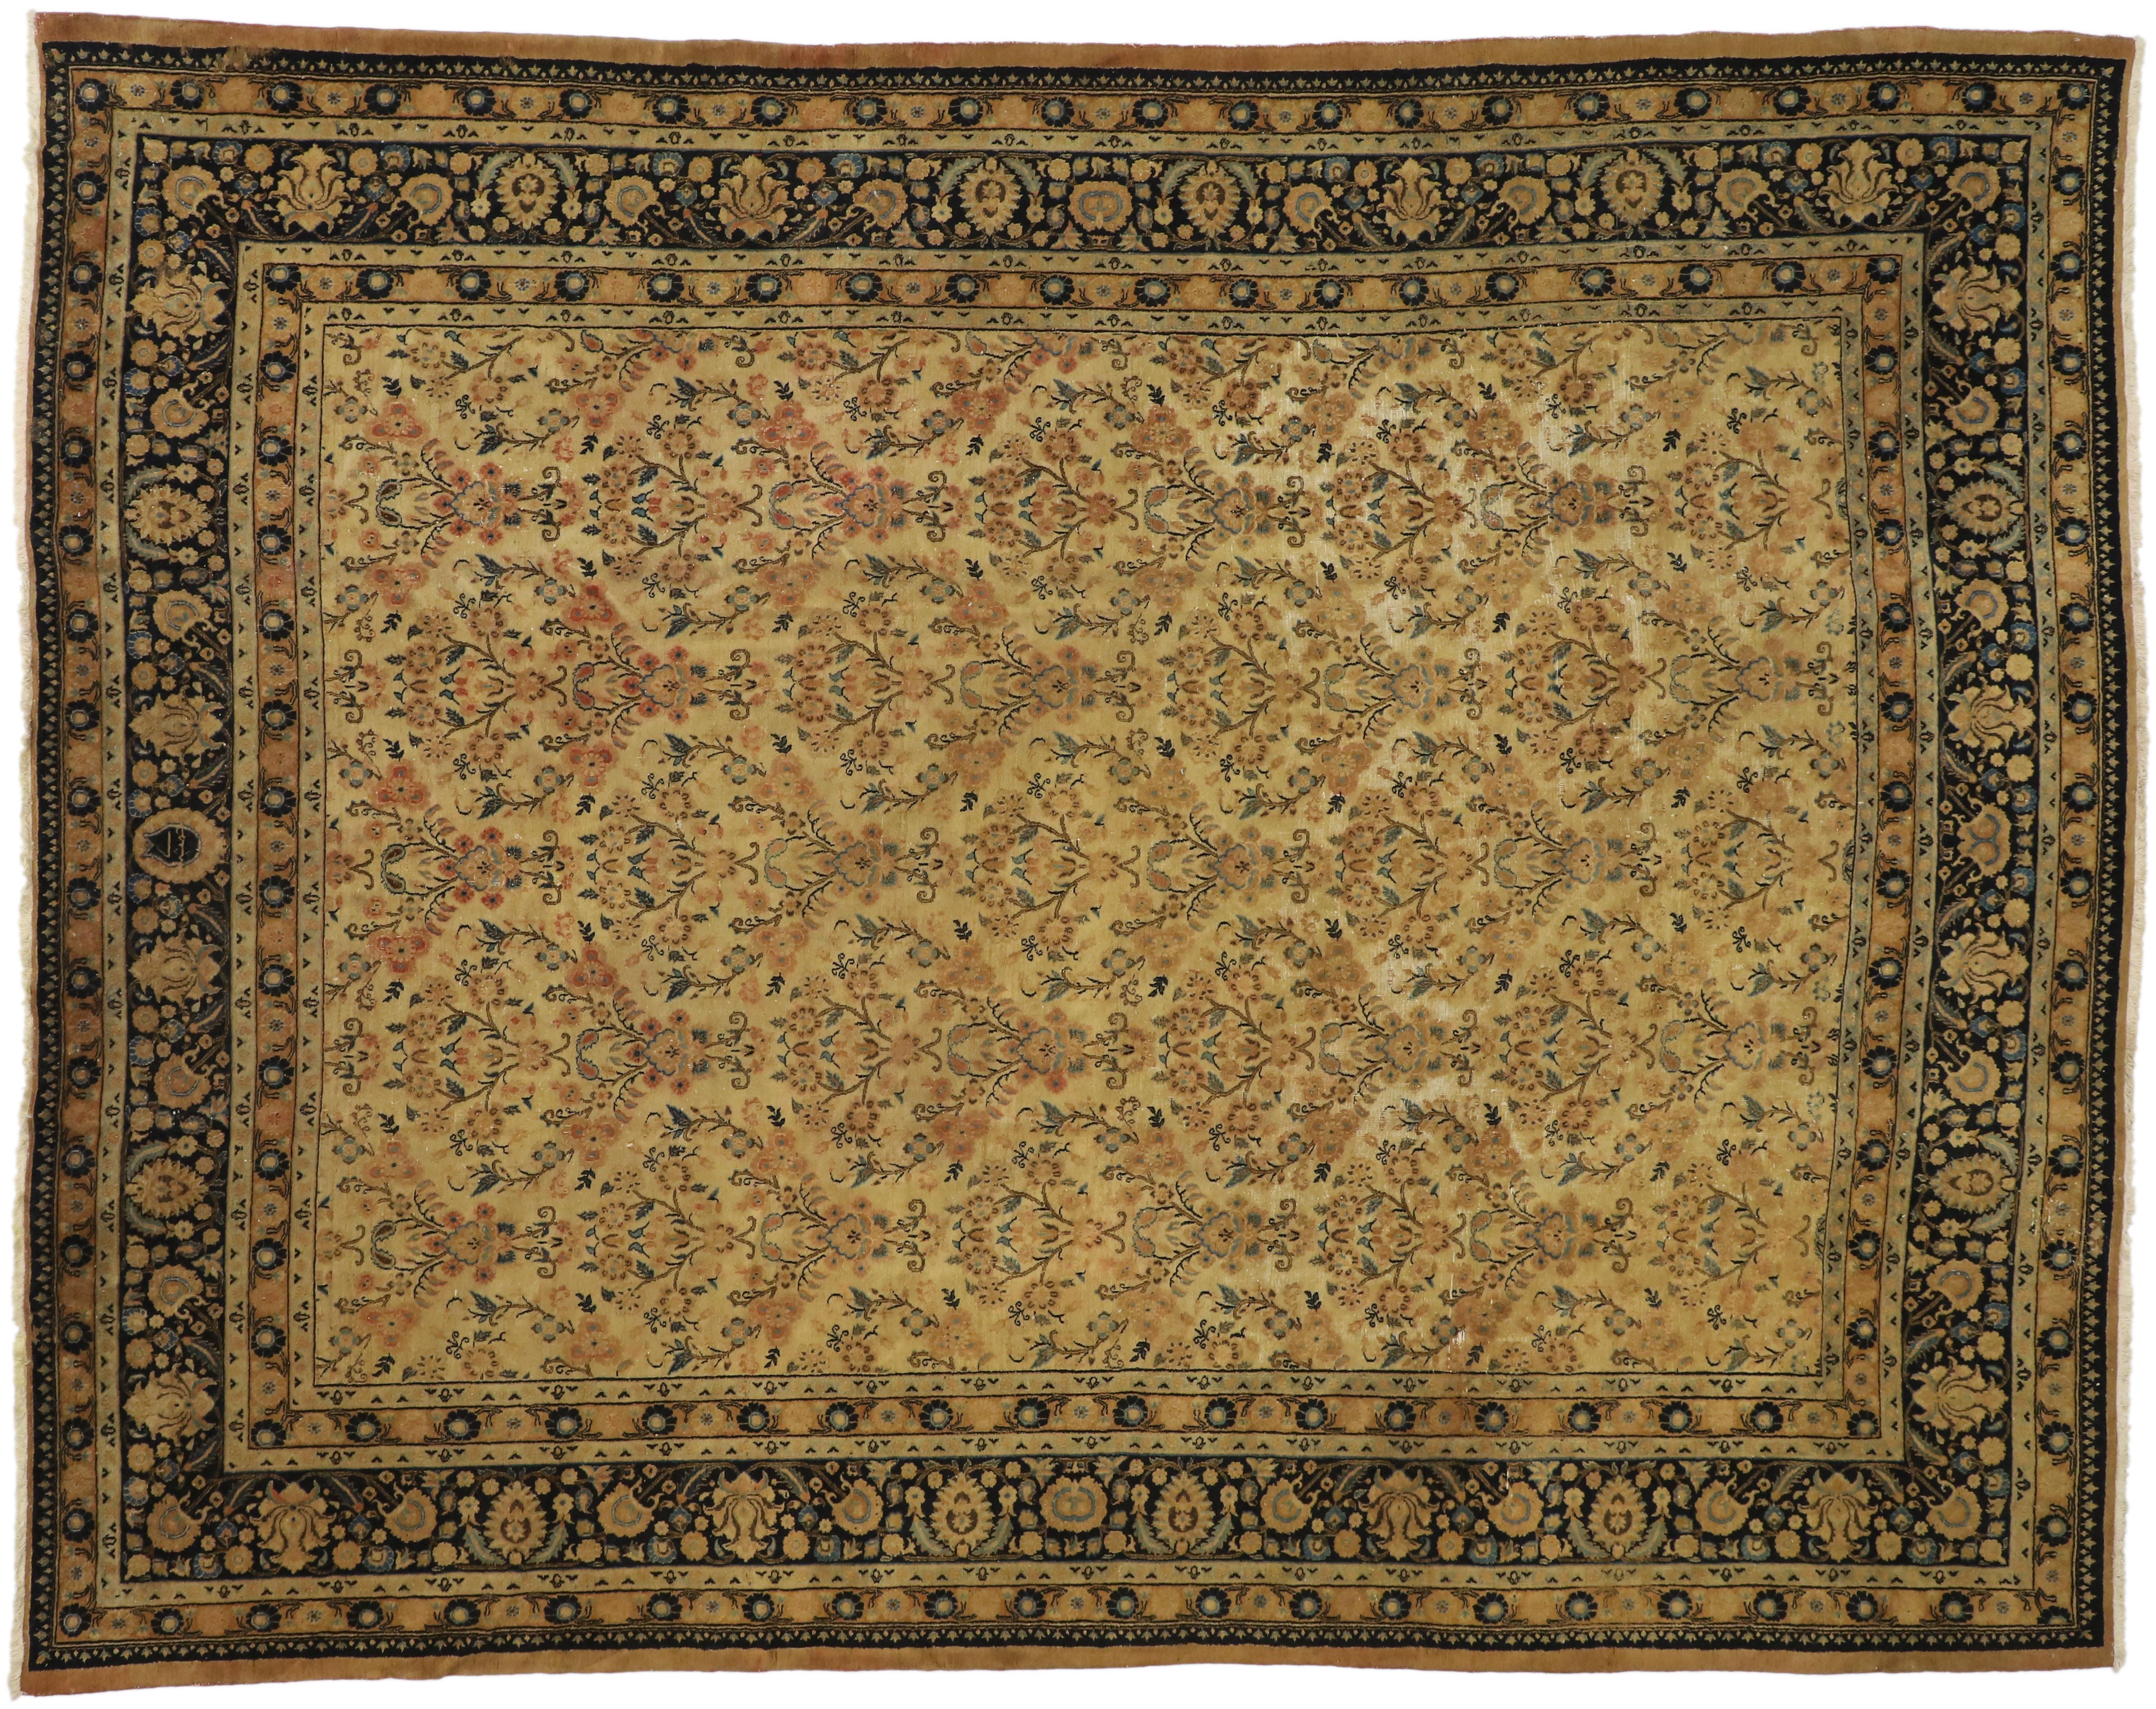 Wool Antique Persian Mashhad Rug with Shabby Chic Rustic European Cottage Style For Sale